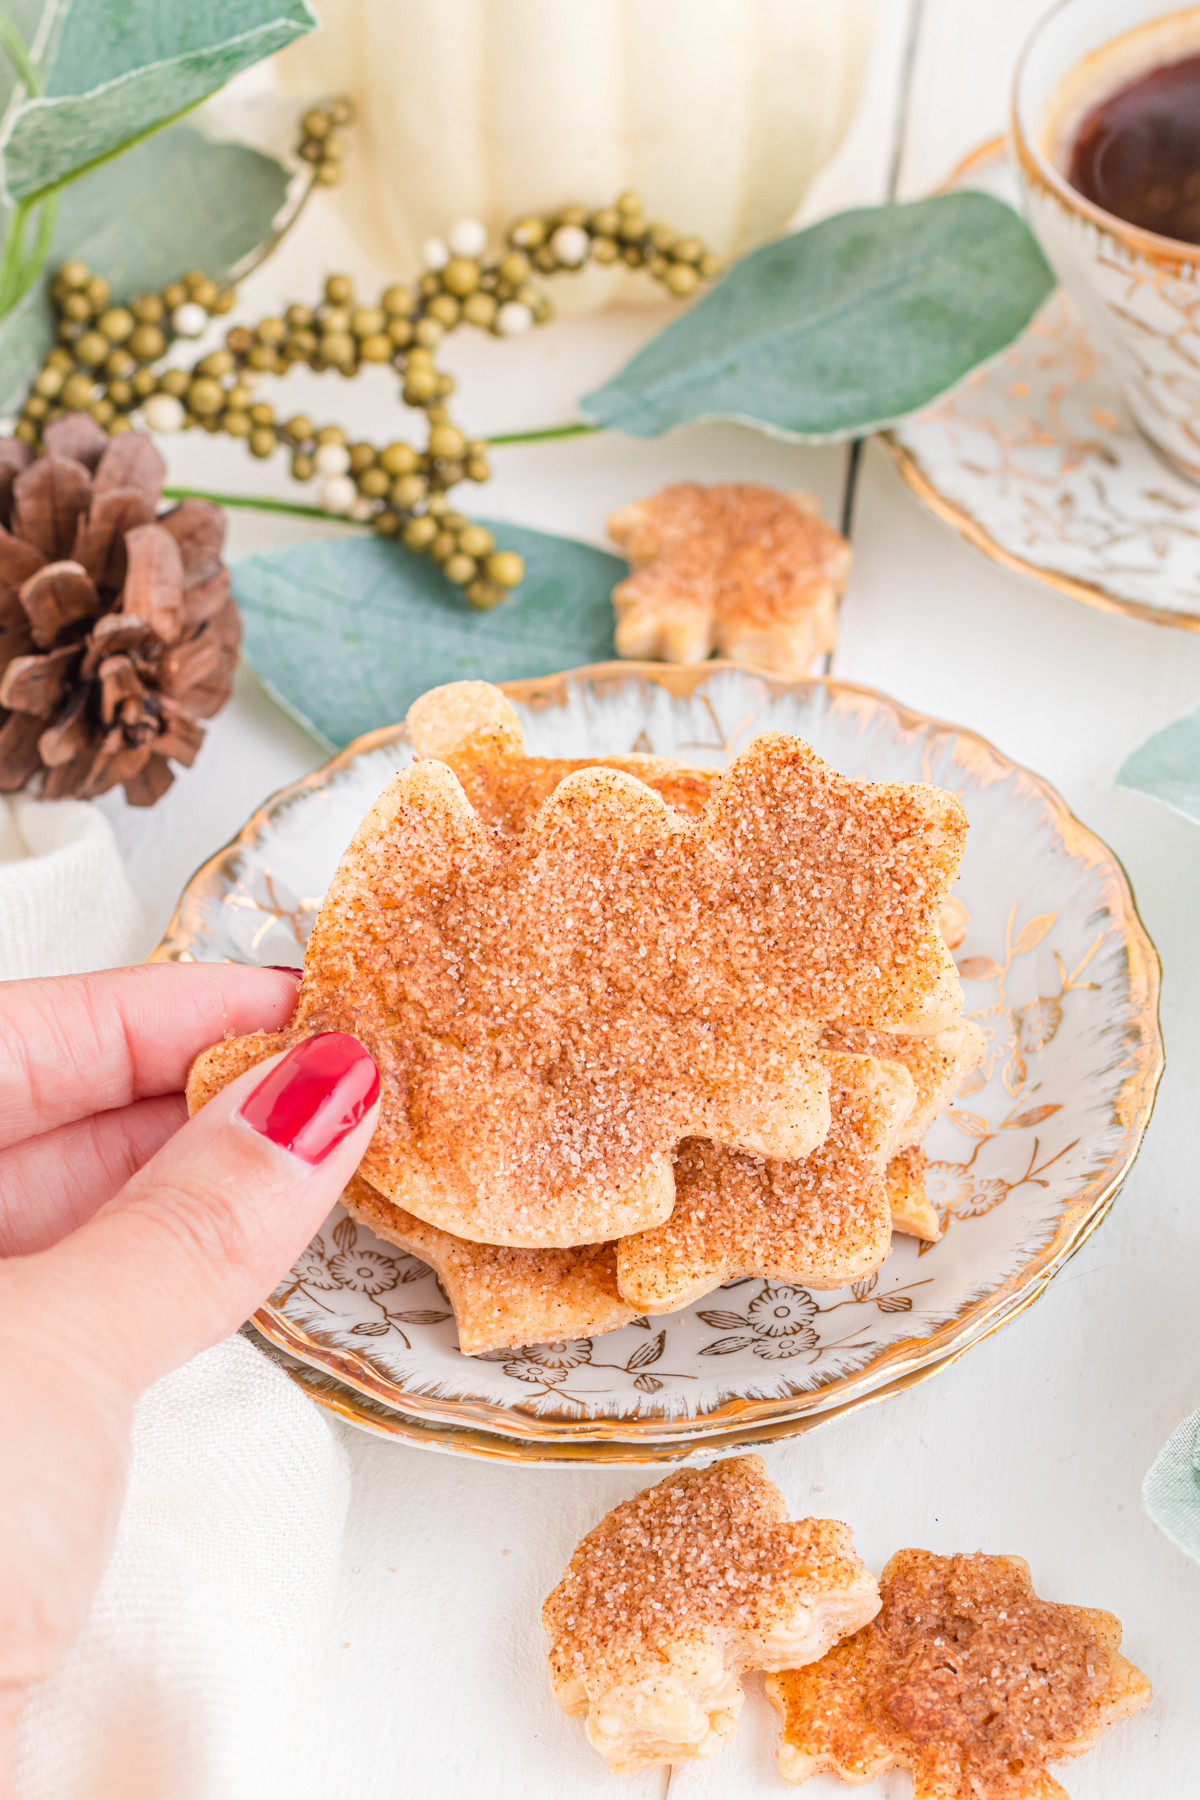 Picking up cinnamon sugar dusted cookie from a plate.